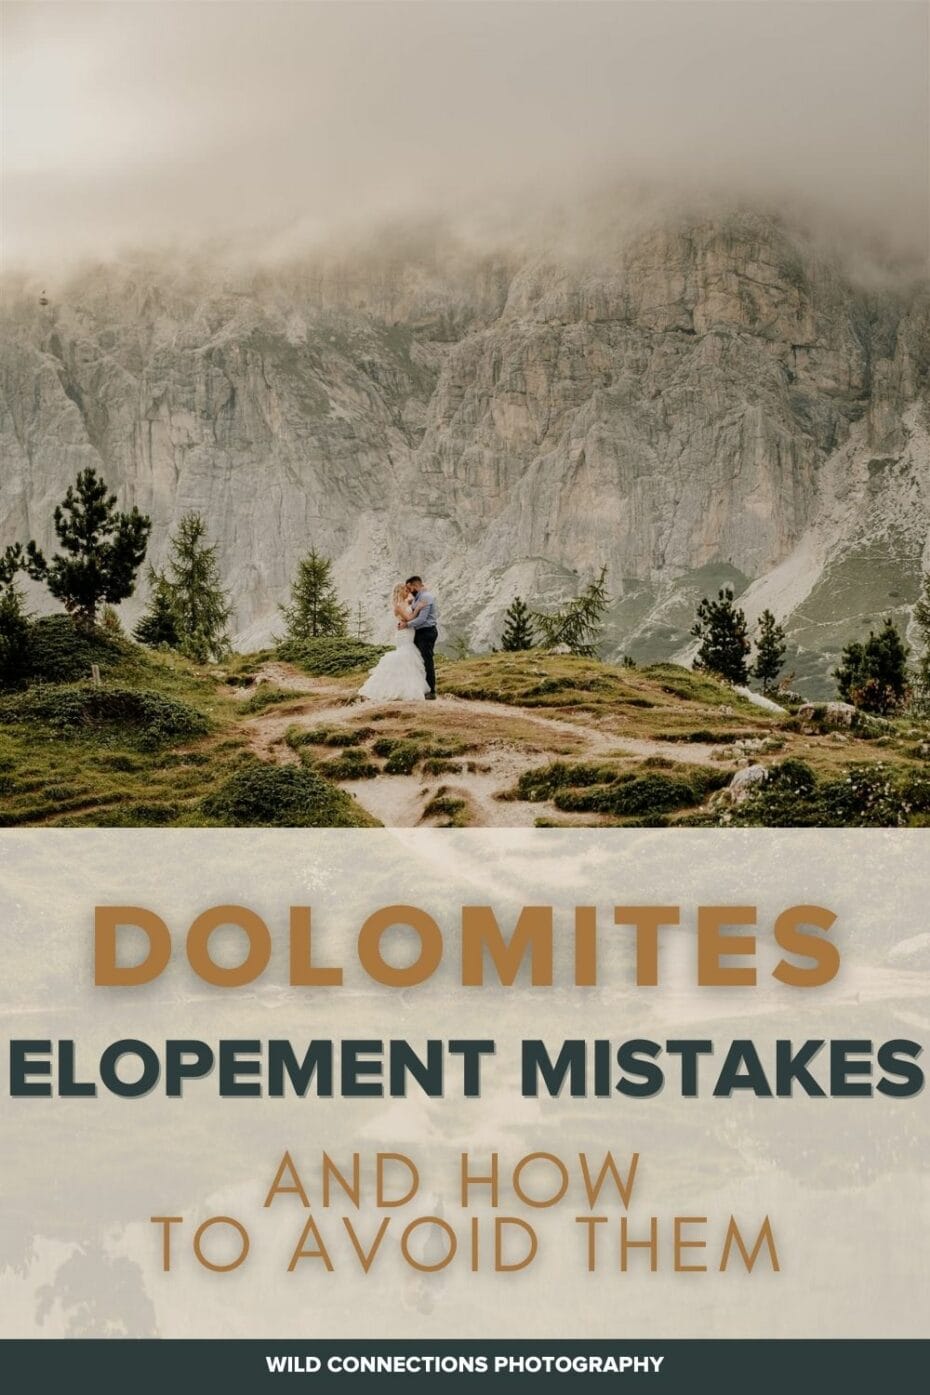 The most common Dolomites elopement planning mistakes, and how to avoid them